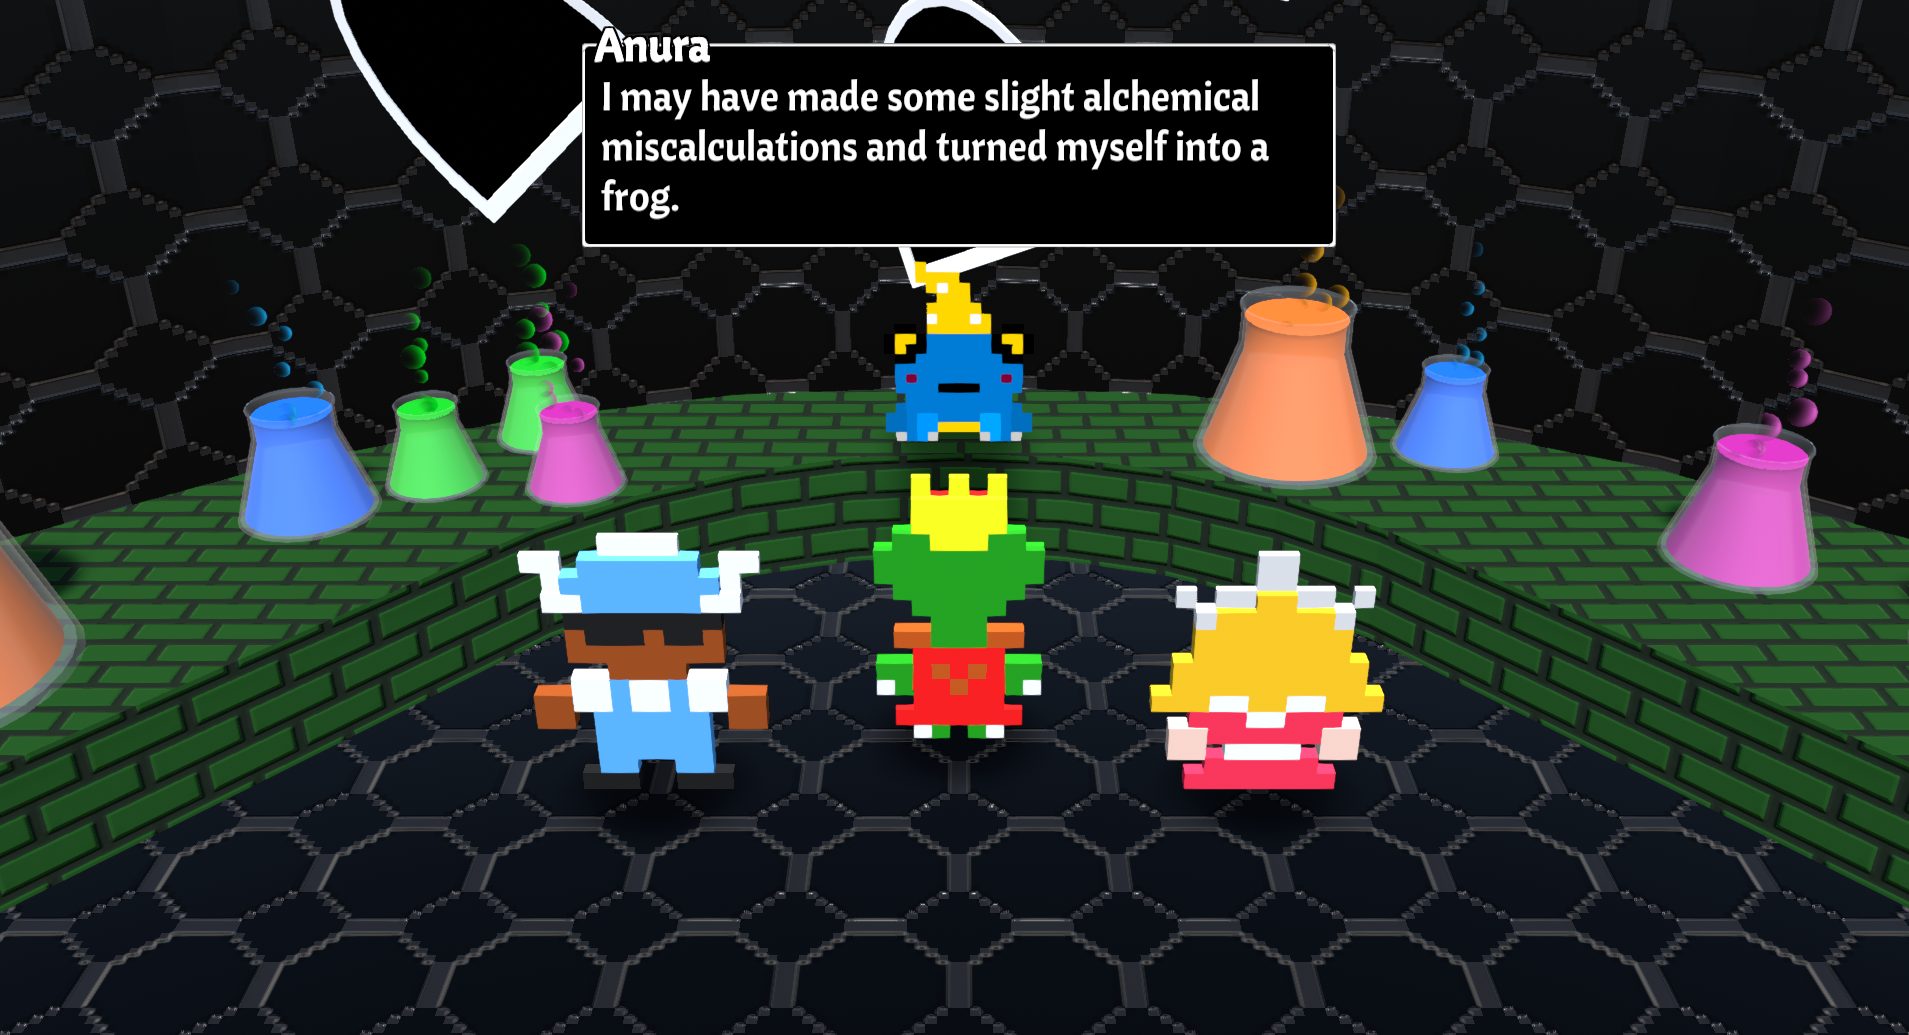 Screenshot of the three protagonists in a lab. A blue frog laments its accidental transformation.